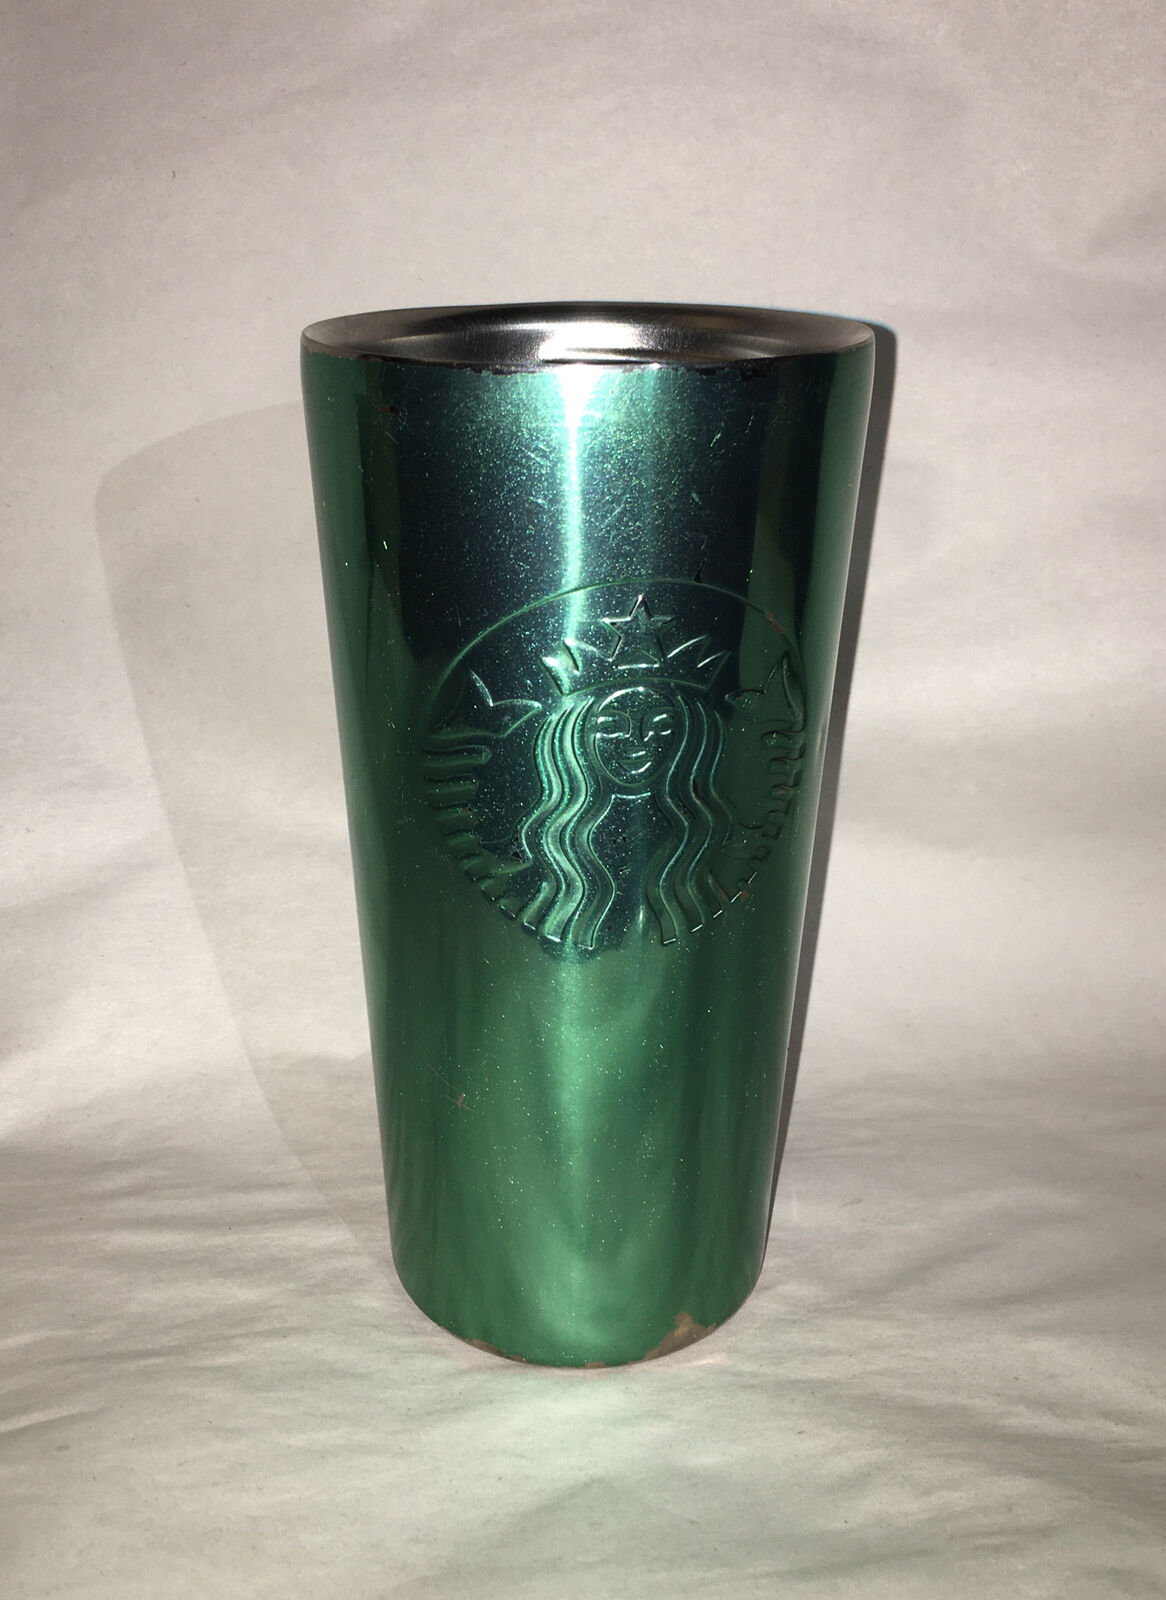 Starbucks High Shine Green Stainless Steel Cold Cup 16 Oz. 2015. No Lid.